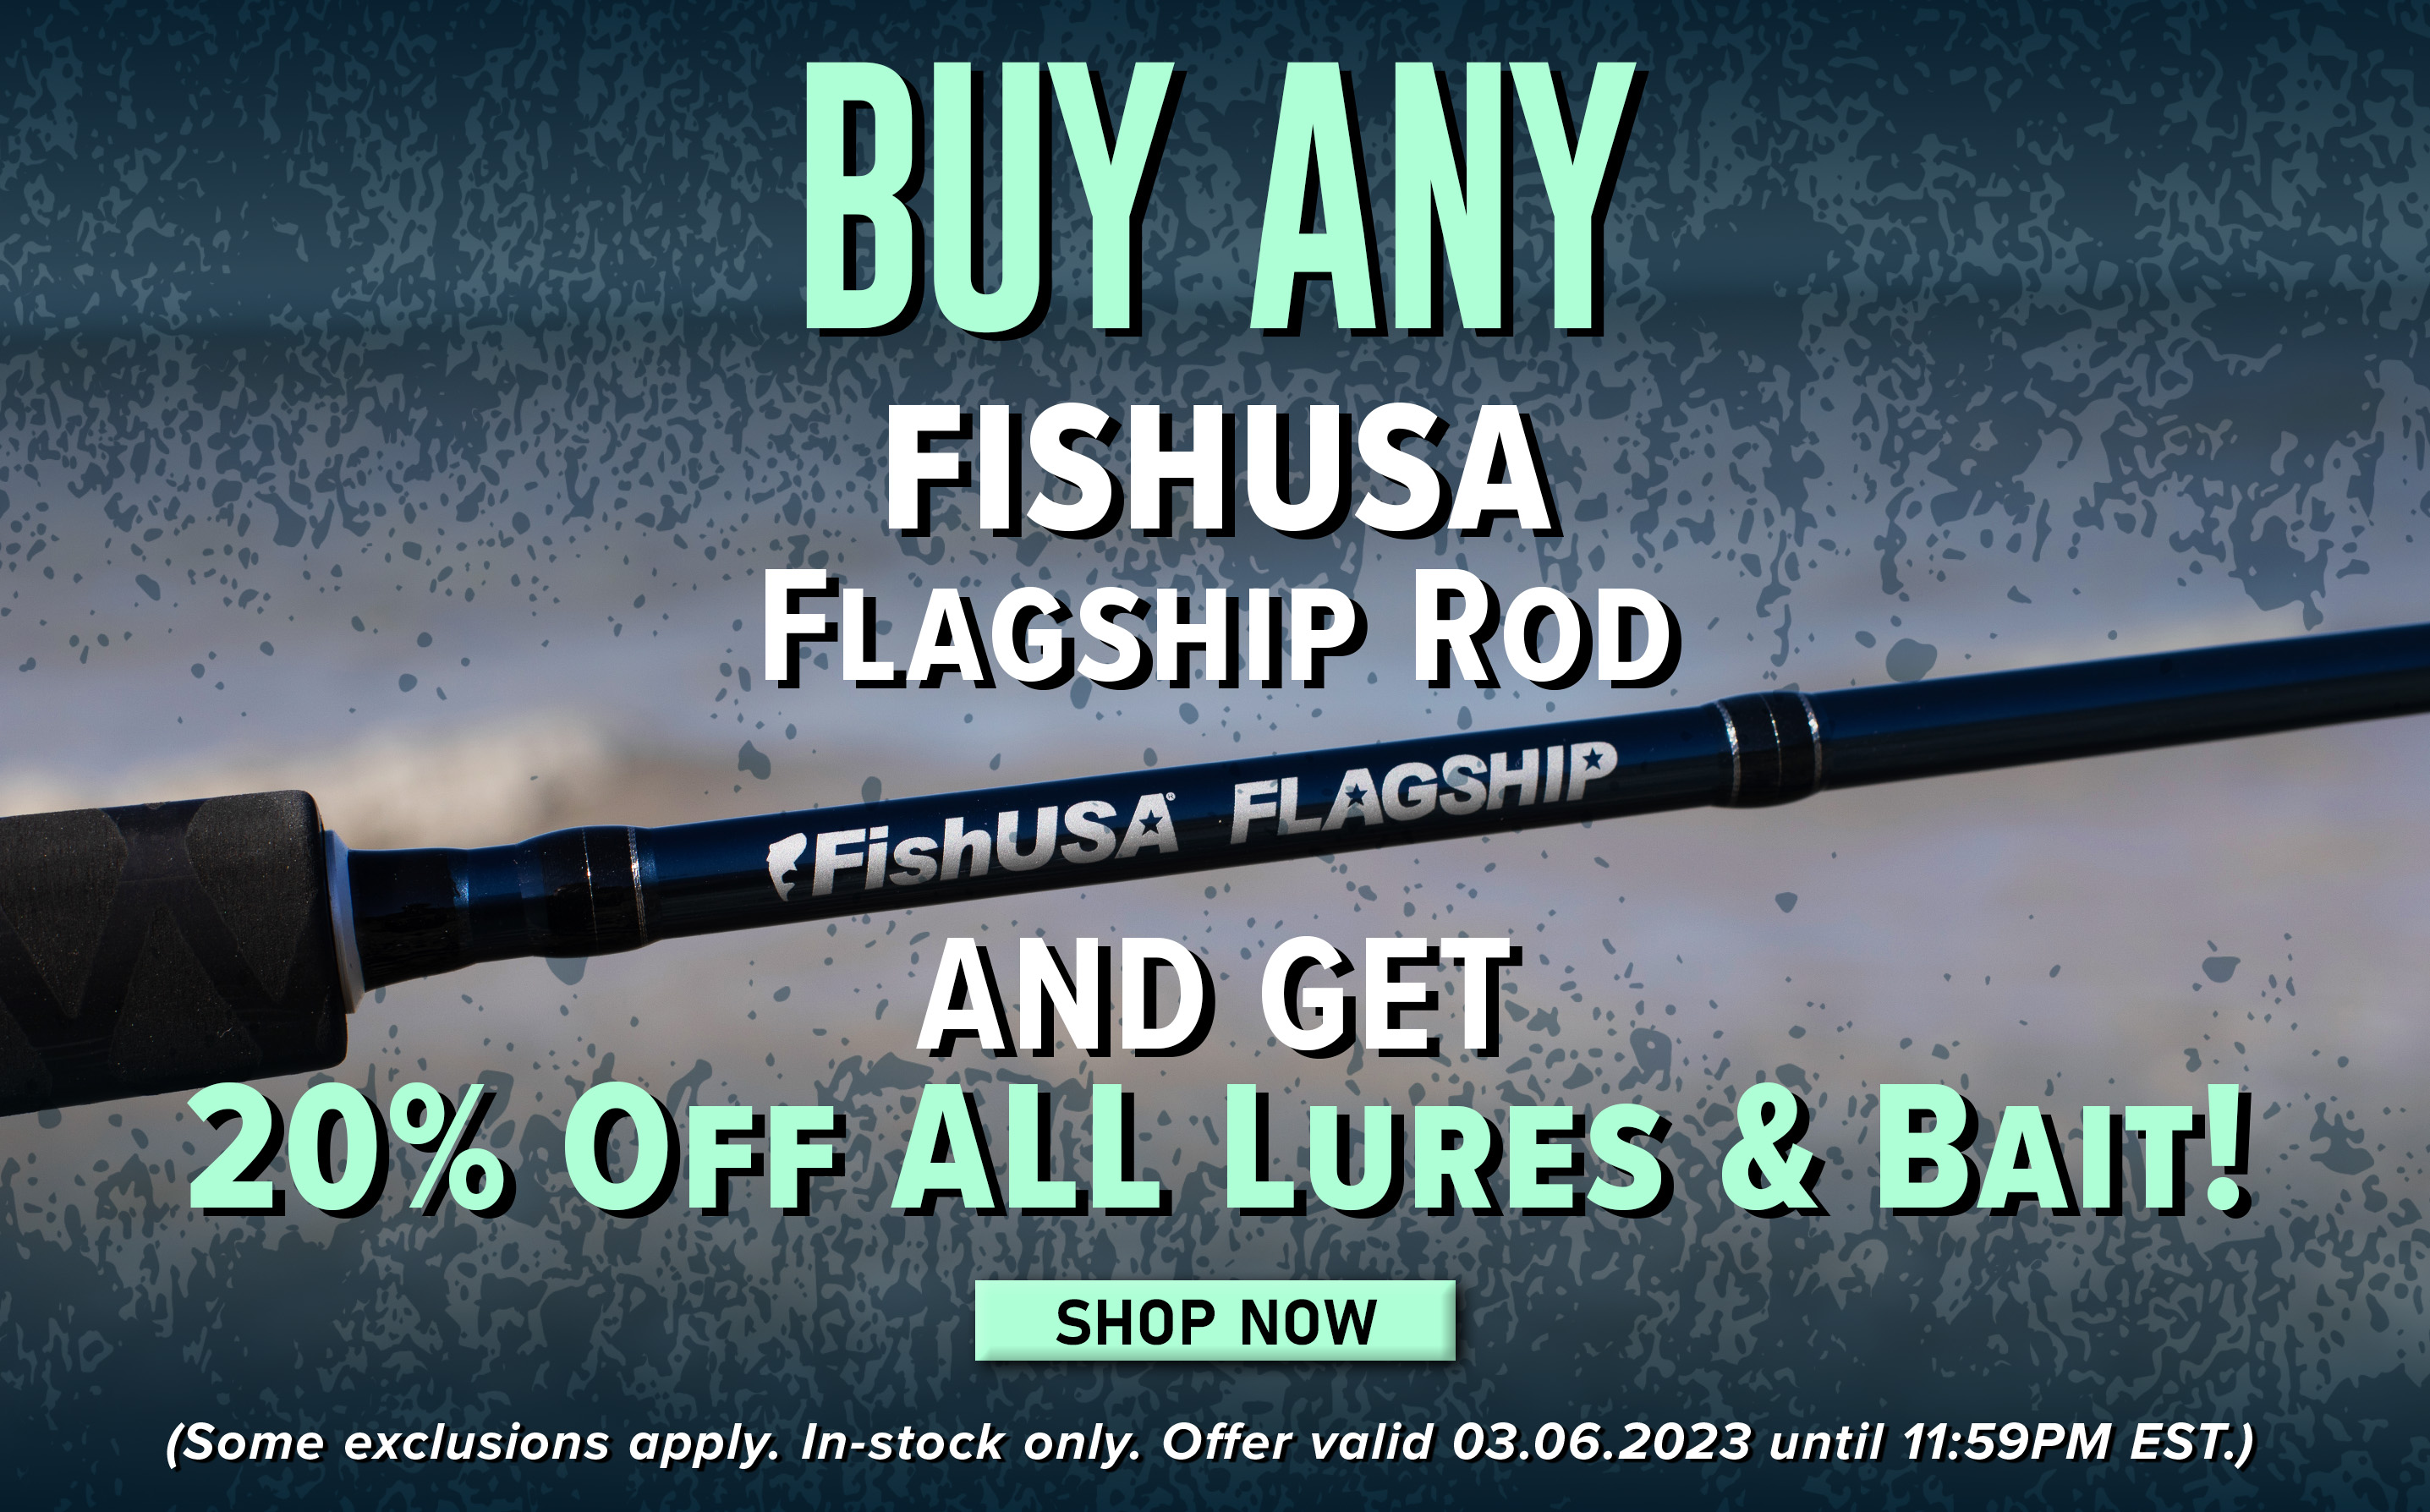 Last Chance to Save 20% on Lures & Bait with a FishUSA Flagship